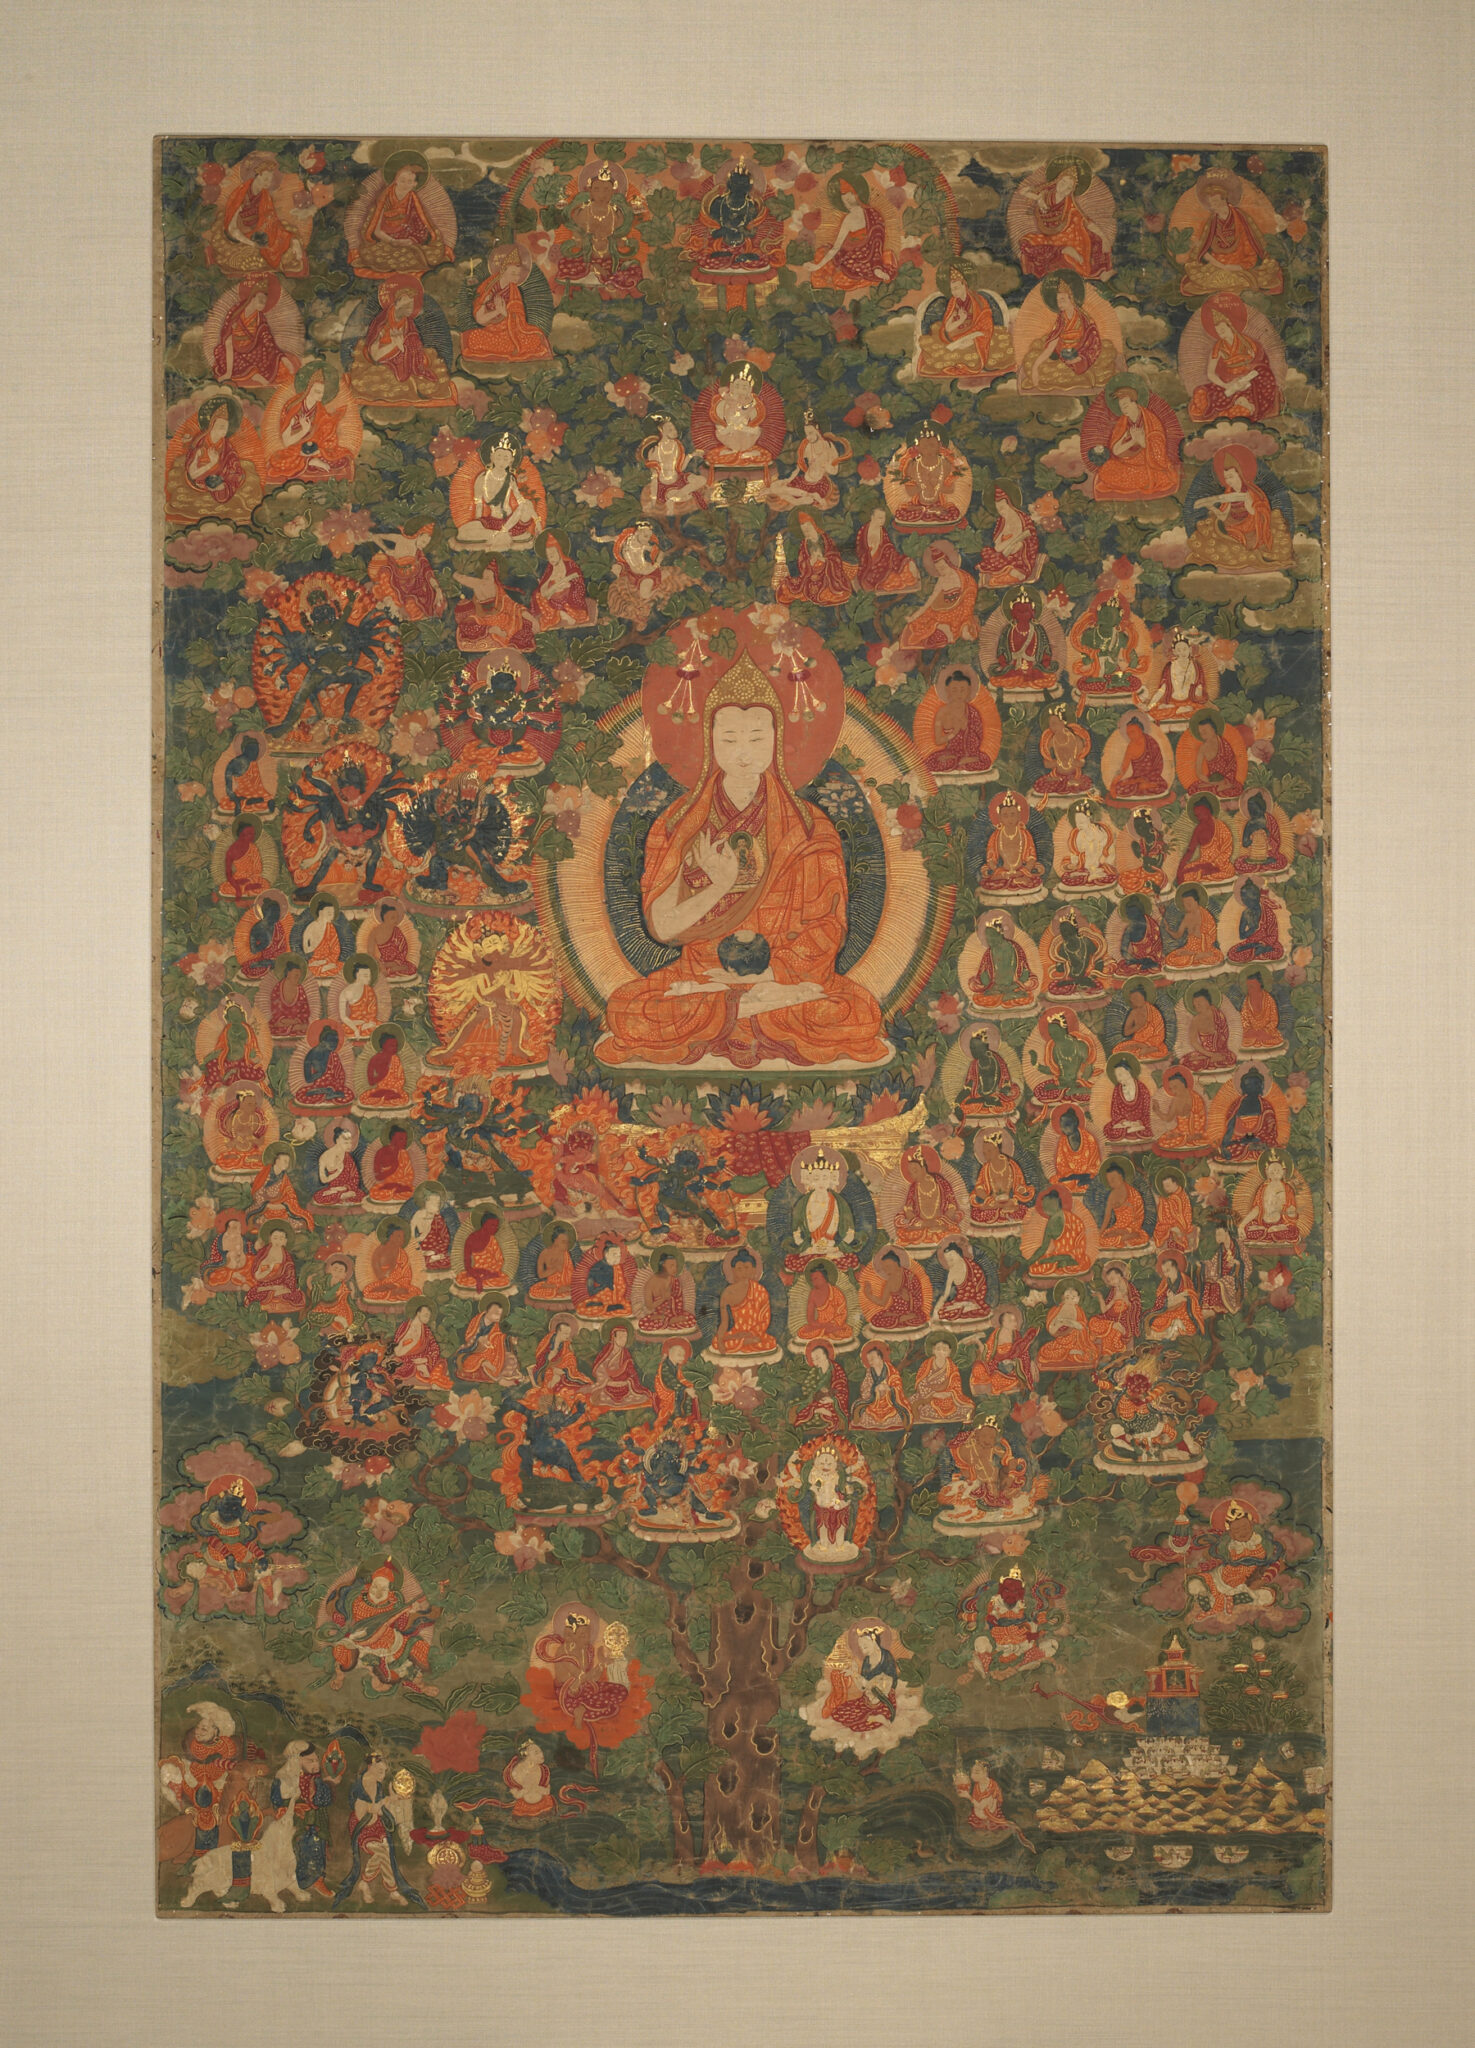 Monk seated in tree, surrounded by dozens of portraits, which hang like leaves from the branches